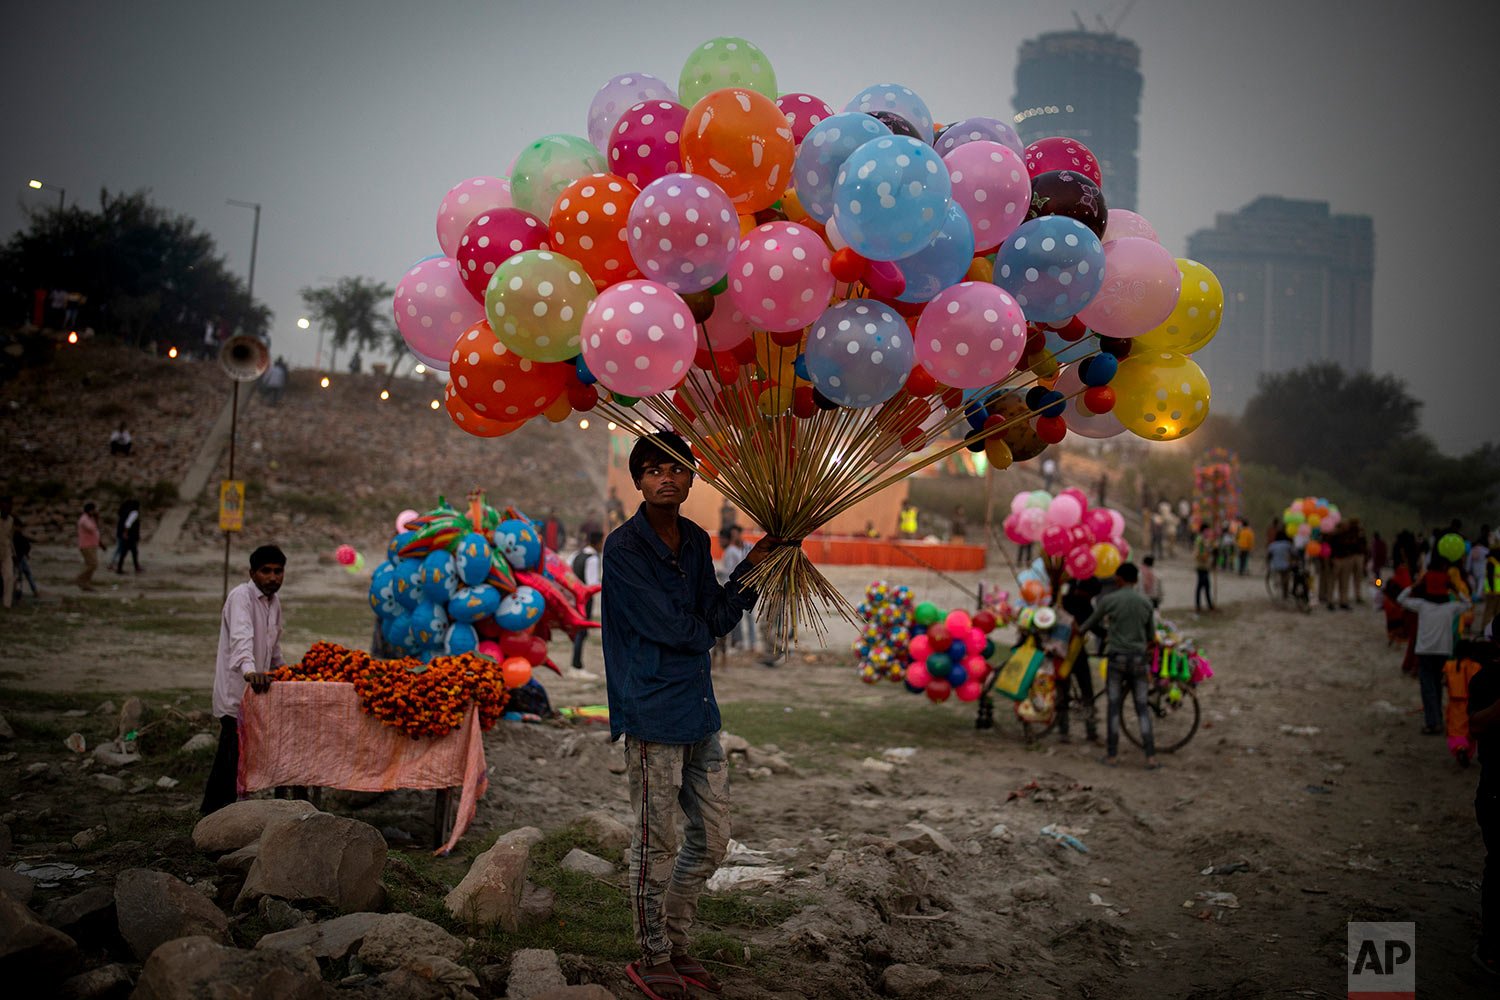  A balloon seller waits for customers on the banks of Yamuna river during Chhath Puja festival in New Delhi, India, Wednesday, Nov. 10, 2021. (AP Photo/Altaf Qadri) 